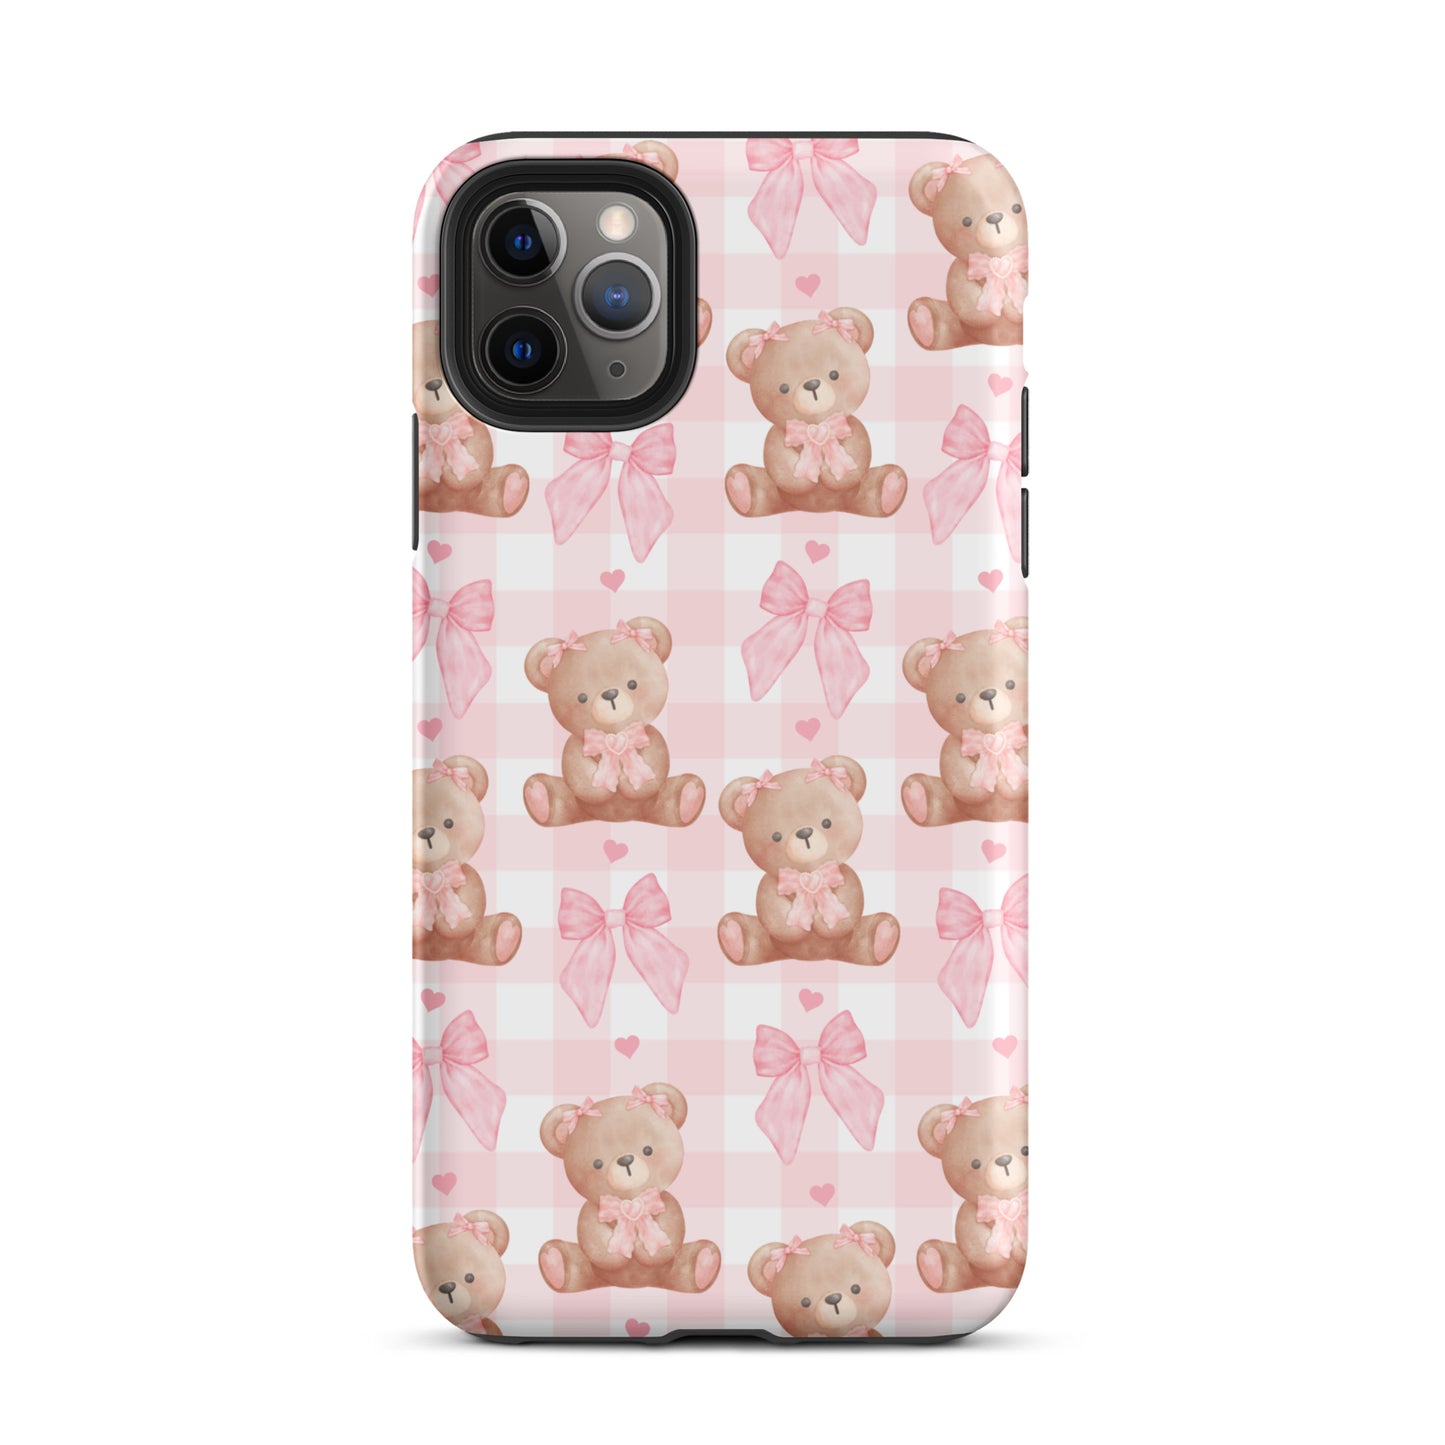 Bows & Bears iPhone Case